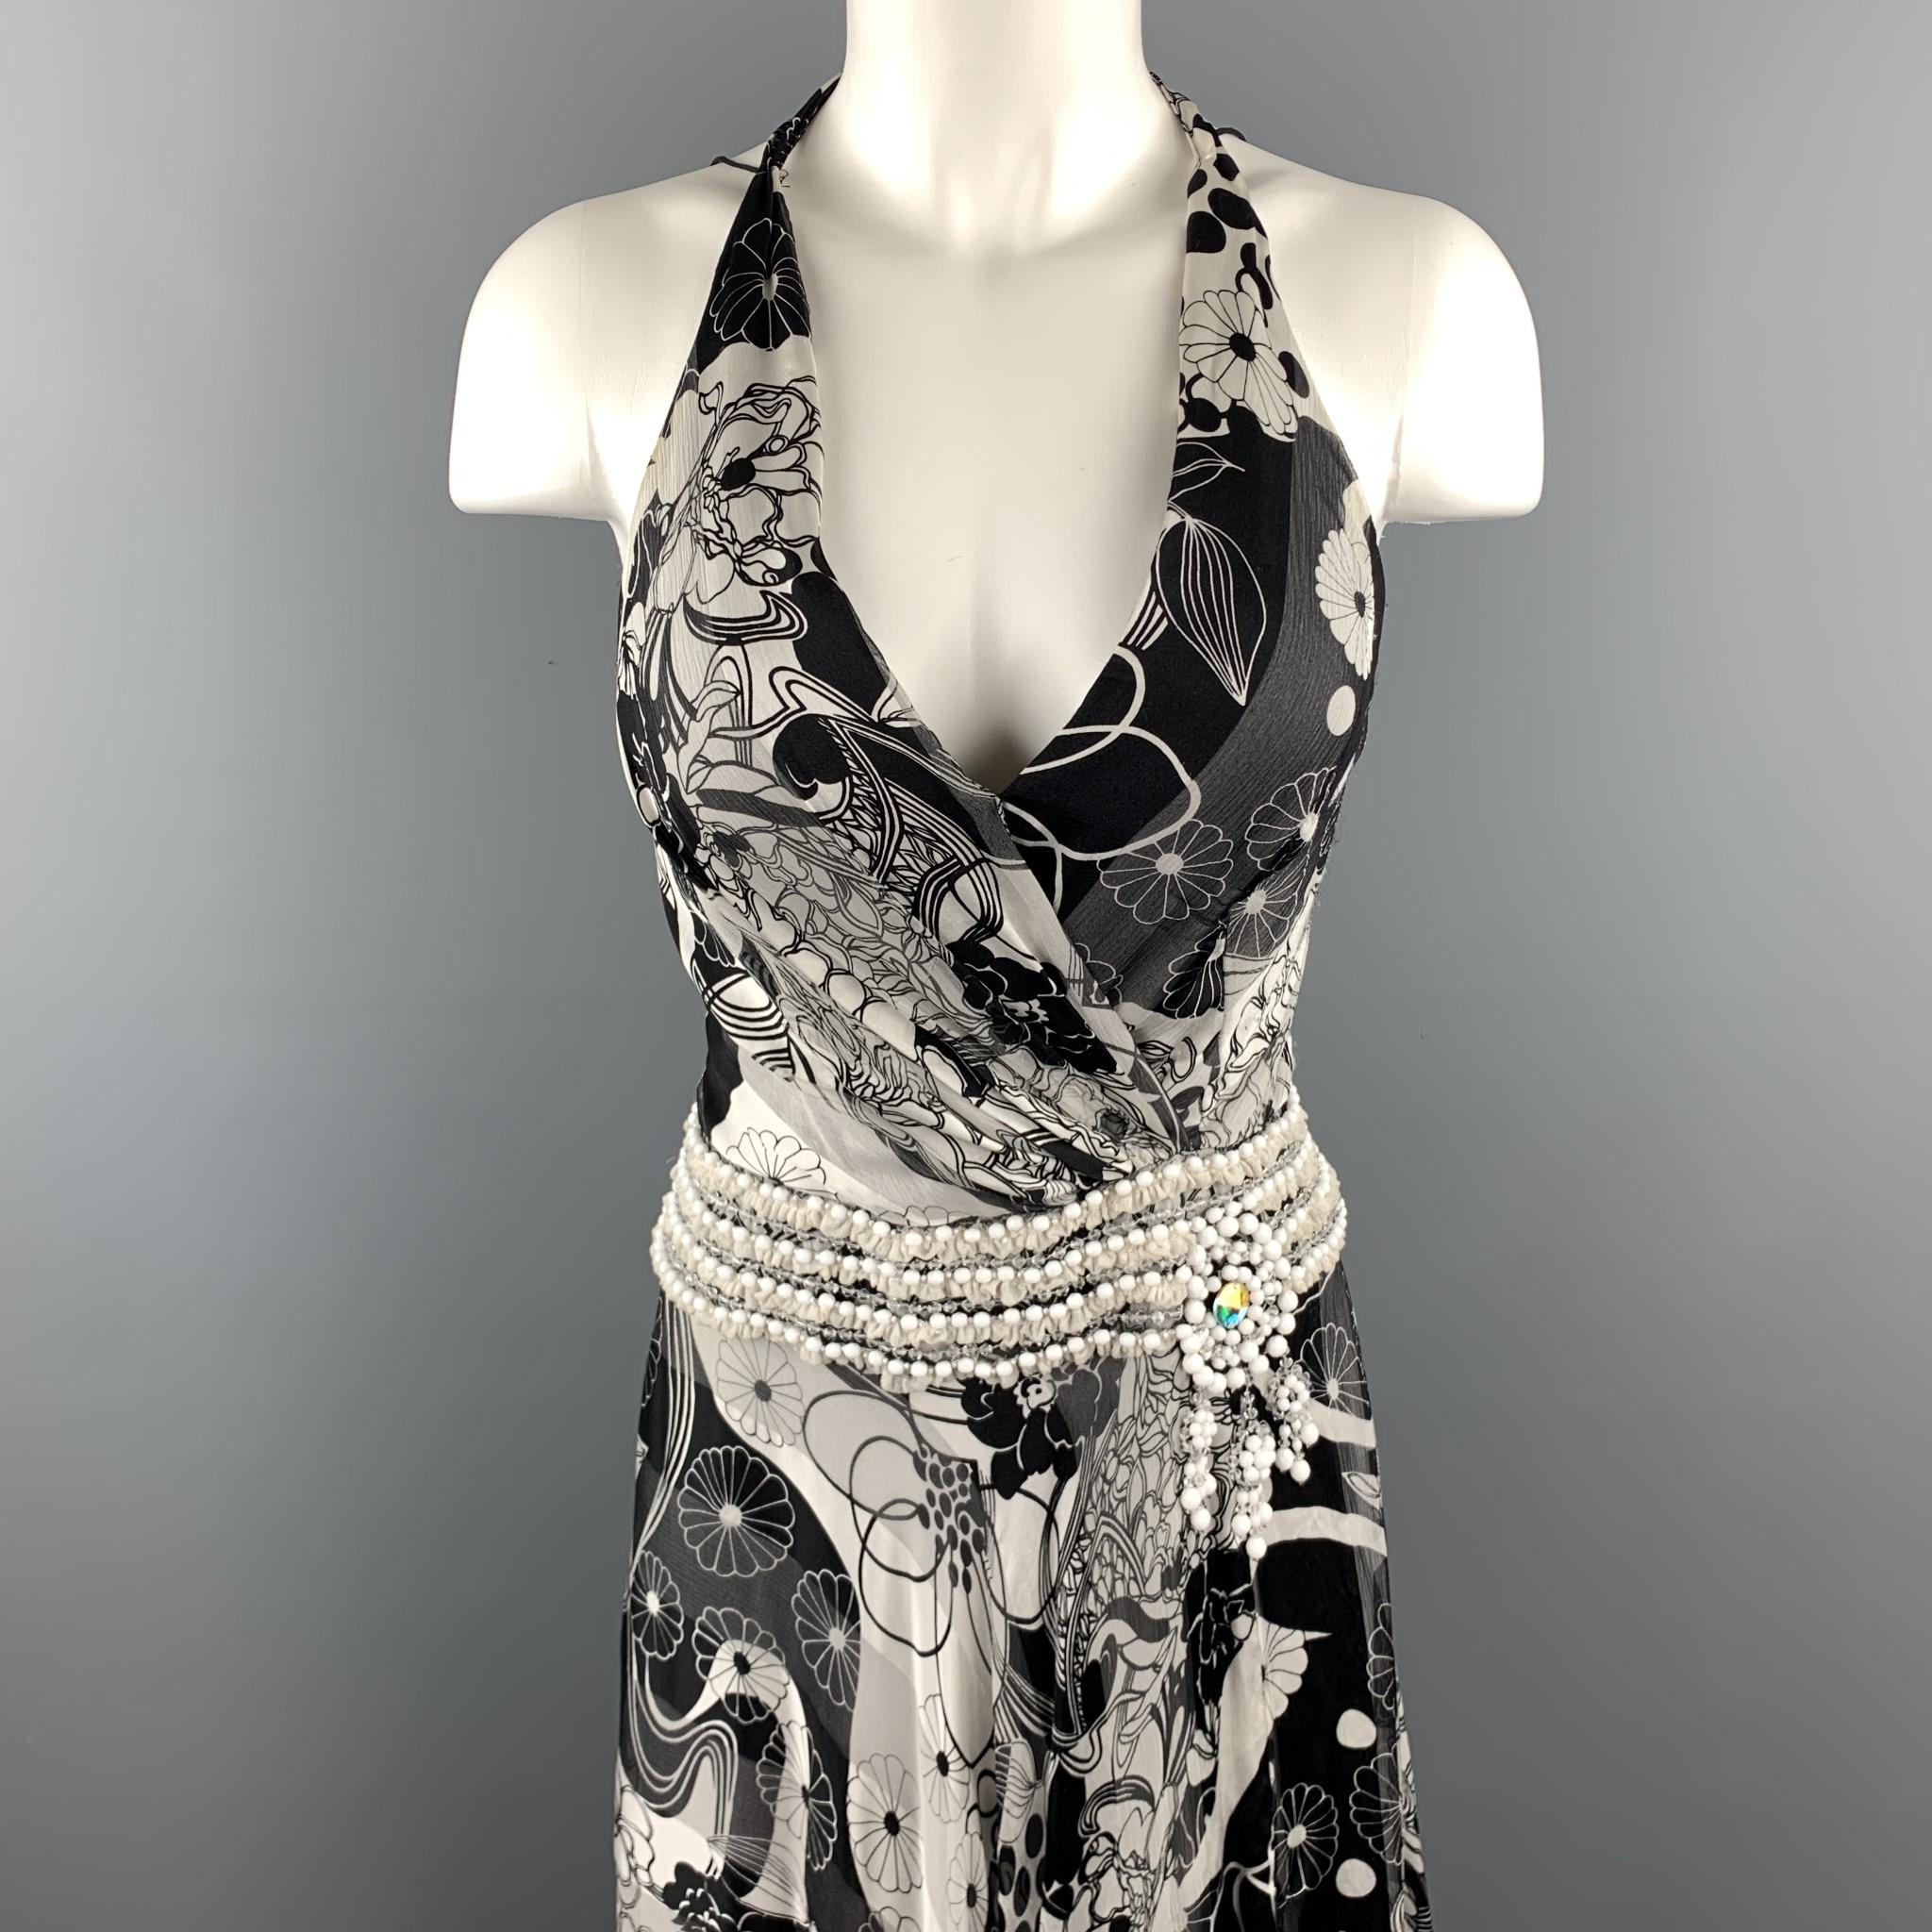 NAEEM KHAN gown comes in black and white floral print silk crepe textured chiffon with a tied halter top, side slit, and beaded trim waistline. Wear around ar holes. As-is. 

Good Pre-Owned Condition.
Marked: (no size)

Measurements:

Bust: 32